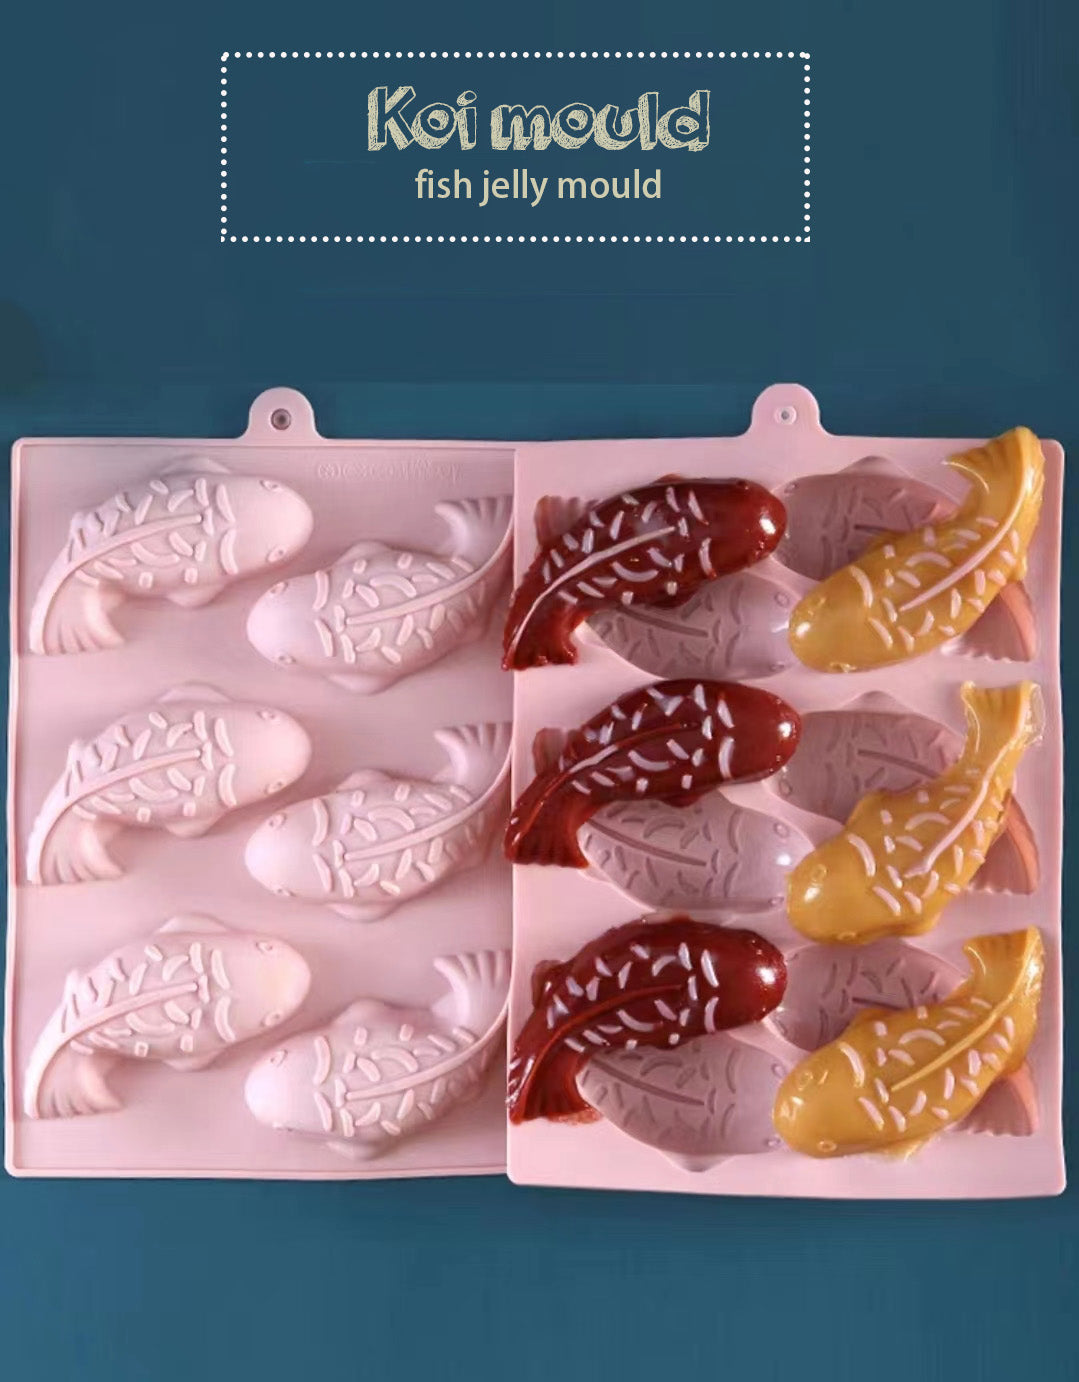 🇸🇬 CNY koi fish silicone mould jelly making new year rice cake making